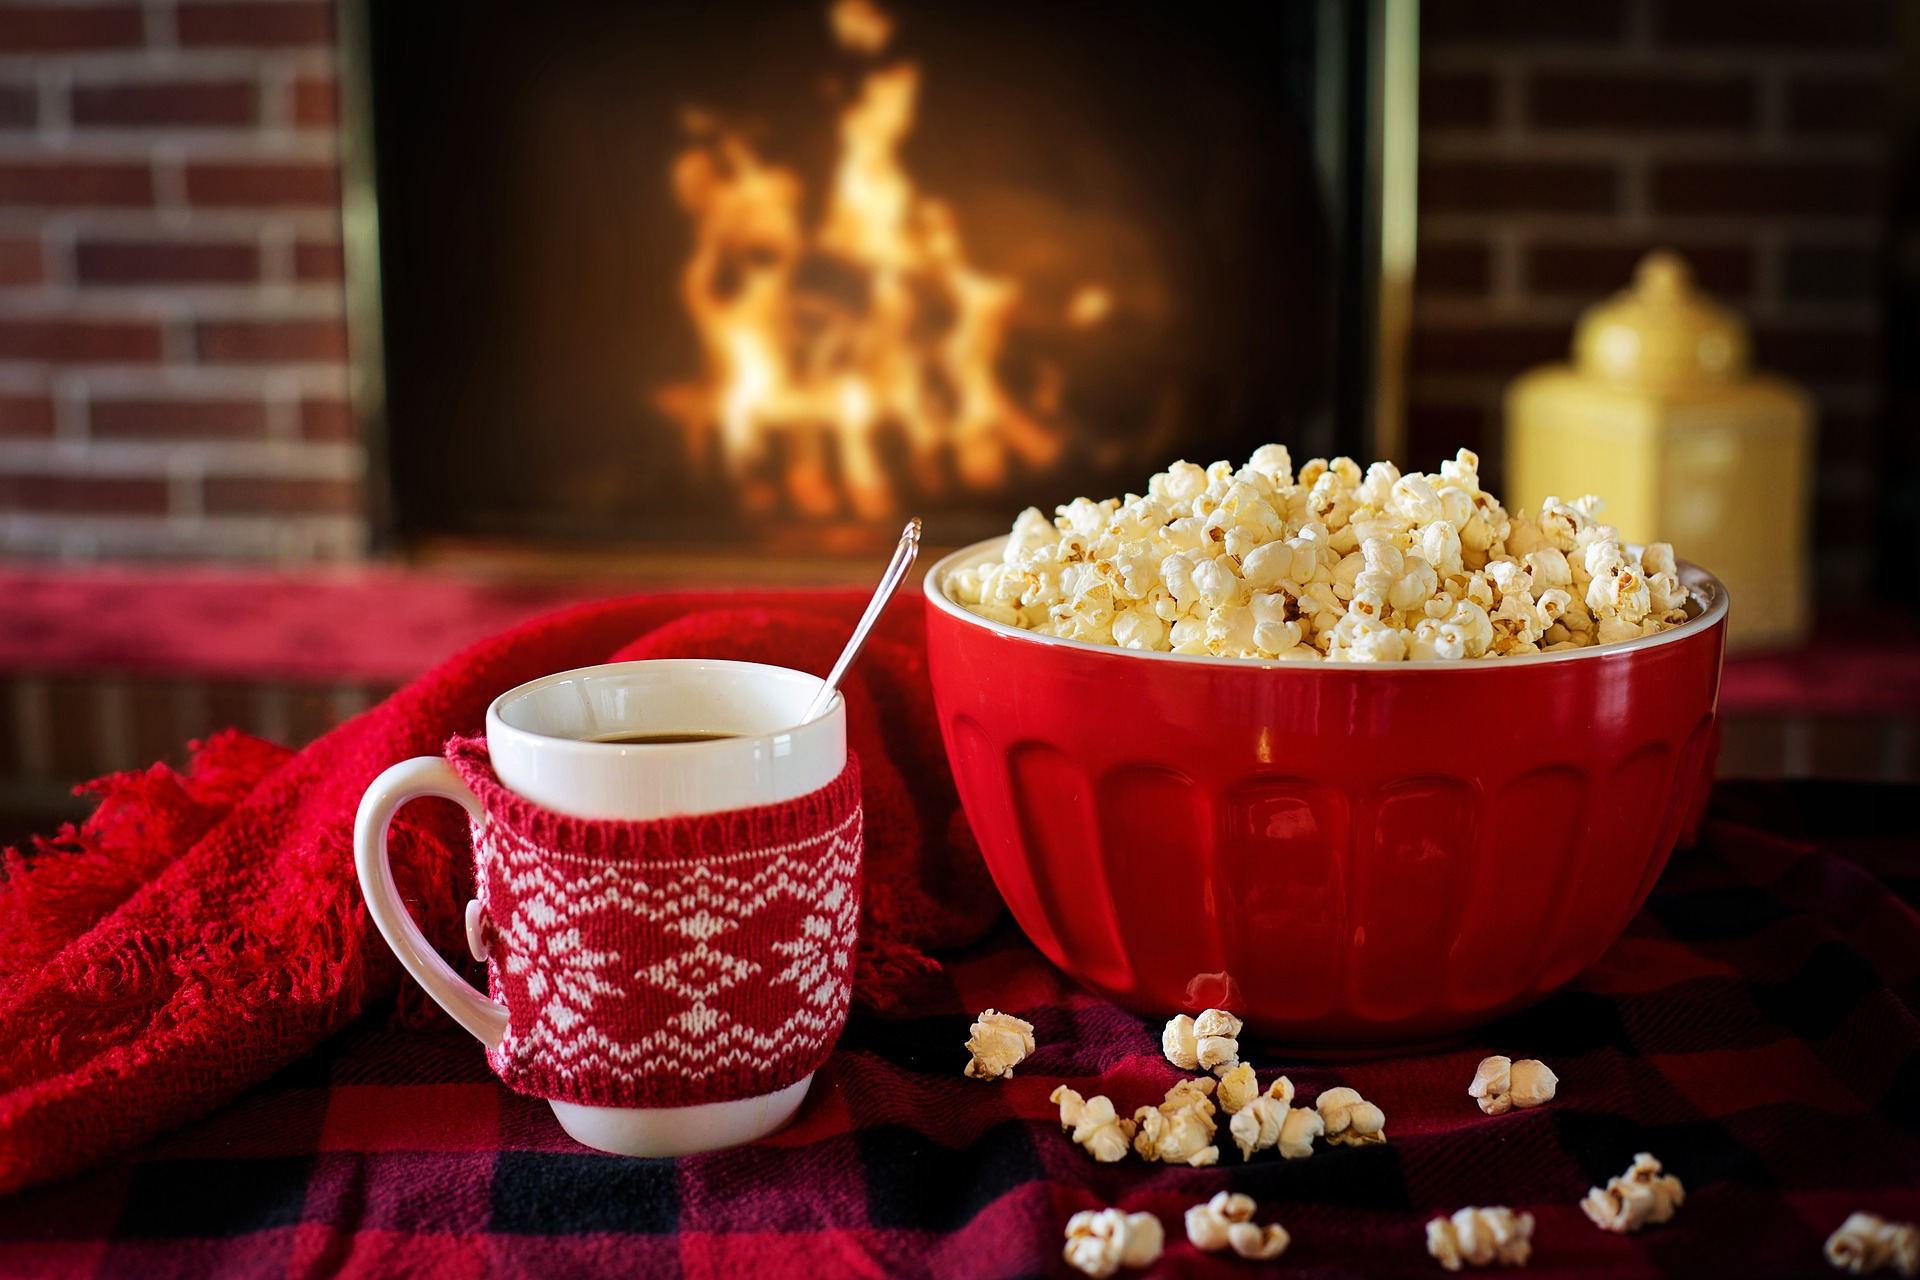 A bowl of popcorn next to a mug of hot cocoa both in front of a fire in a fireplace